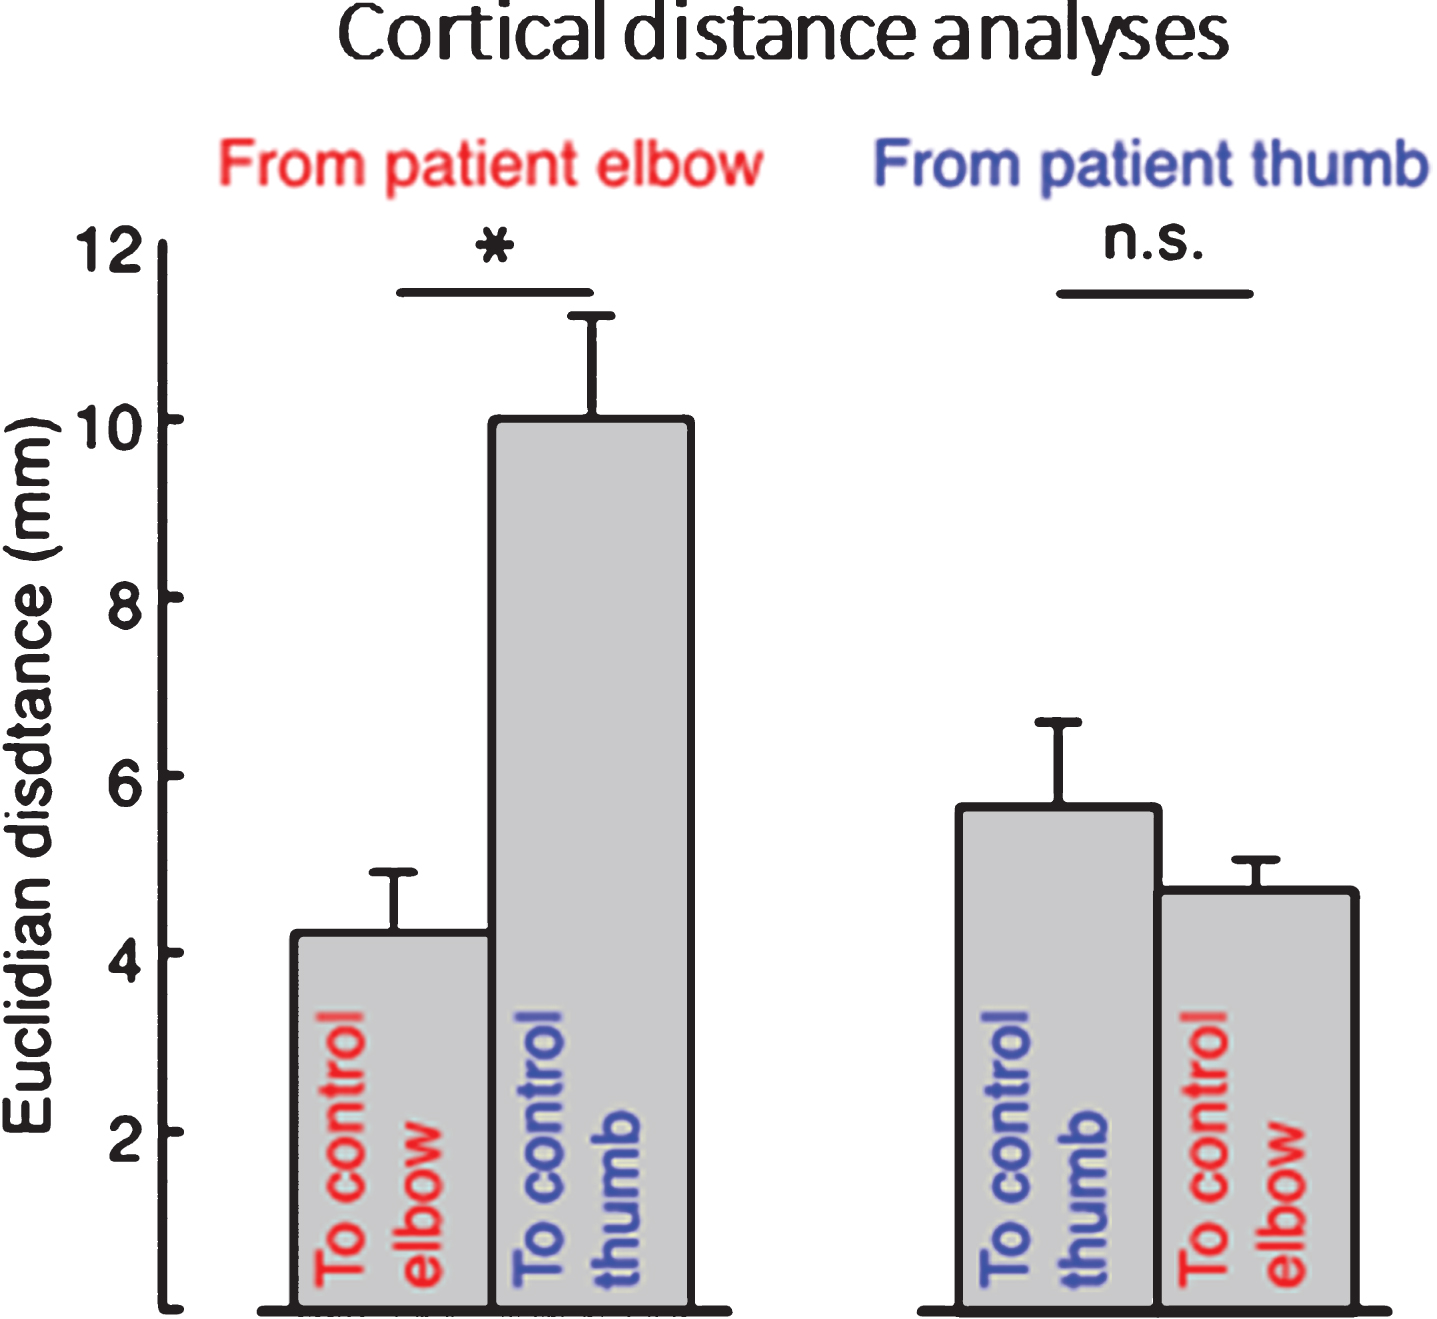 Average cortical distances between patients’ elbow and thumb flexion activation centers of gravity (CoGs) and control participant’s CoGs, showing that the distance from patient’s elbow CoG to the average control participant’s elbow CoG was significantly smaller than the distance from patient’s elbow CoG to the average control thumb CoG, whereas patient’s thumb CoG was not more near neither the average control’s thumb or elbow CoG. Error bars indicate standard error of the mean. Significance of planned comparisons (one-tailed t-tests) are denoted as follows:  *p < 0.05, n.s. p > 0.05.